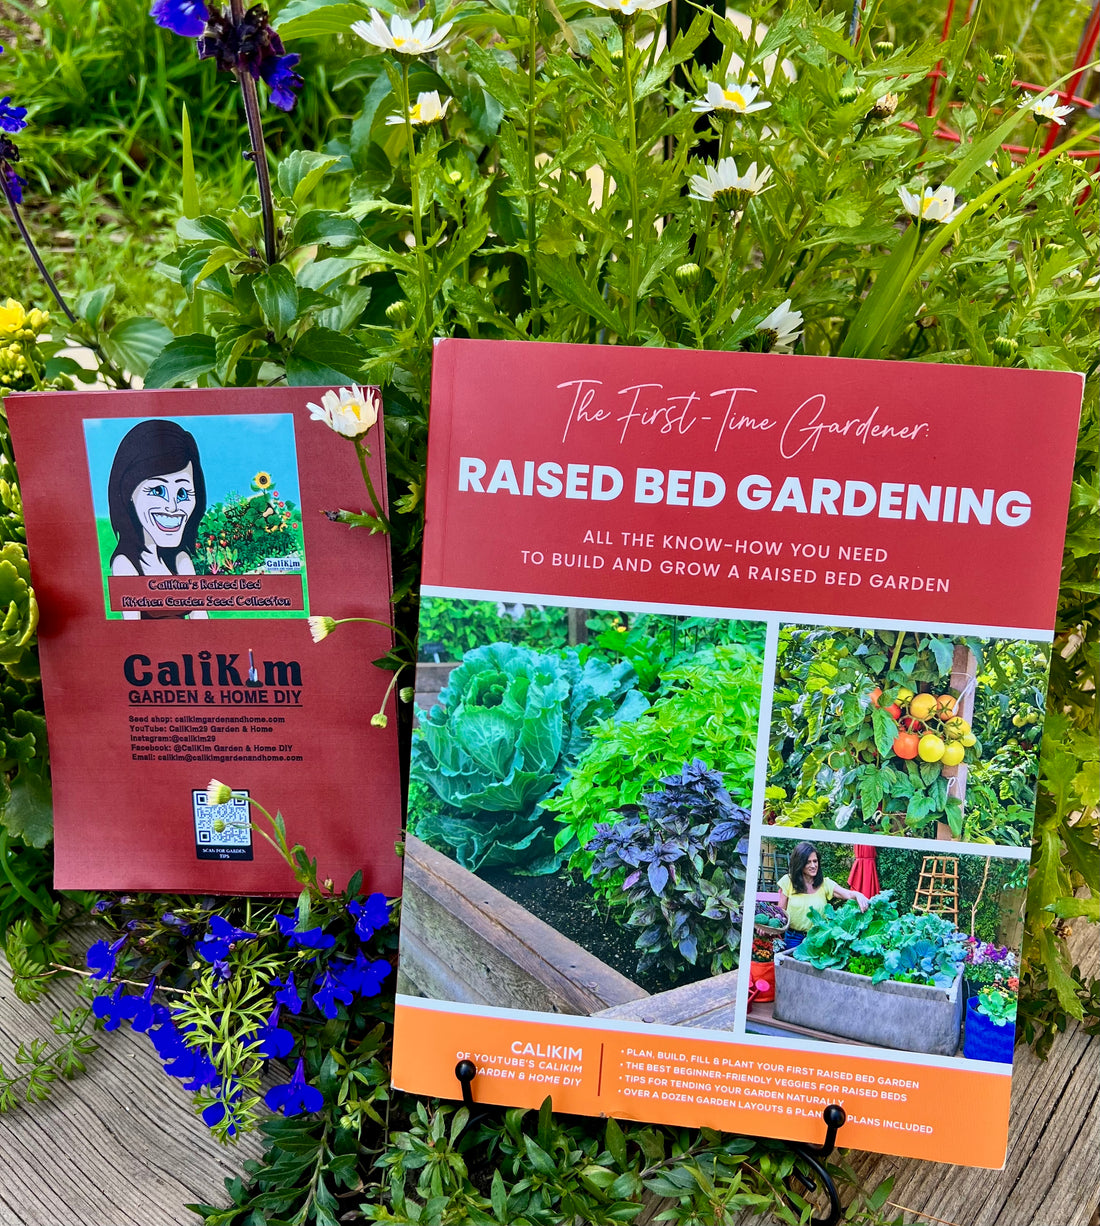 The First Time Gardener:Raised Bed Gardening  - Signed &amp; Personalized with Raised Bed Kitchen Garden Seed Collection -  Seed/Book Bundle